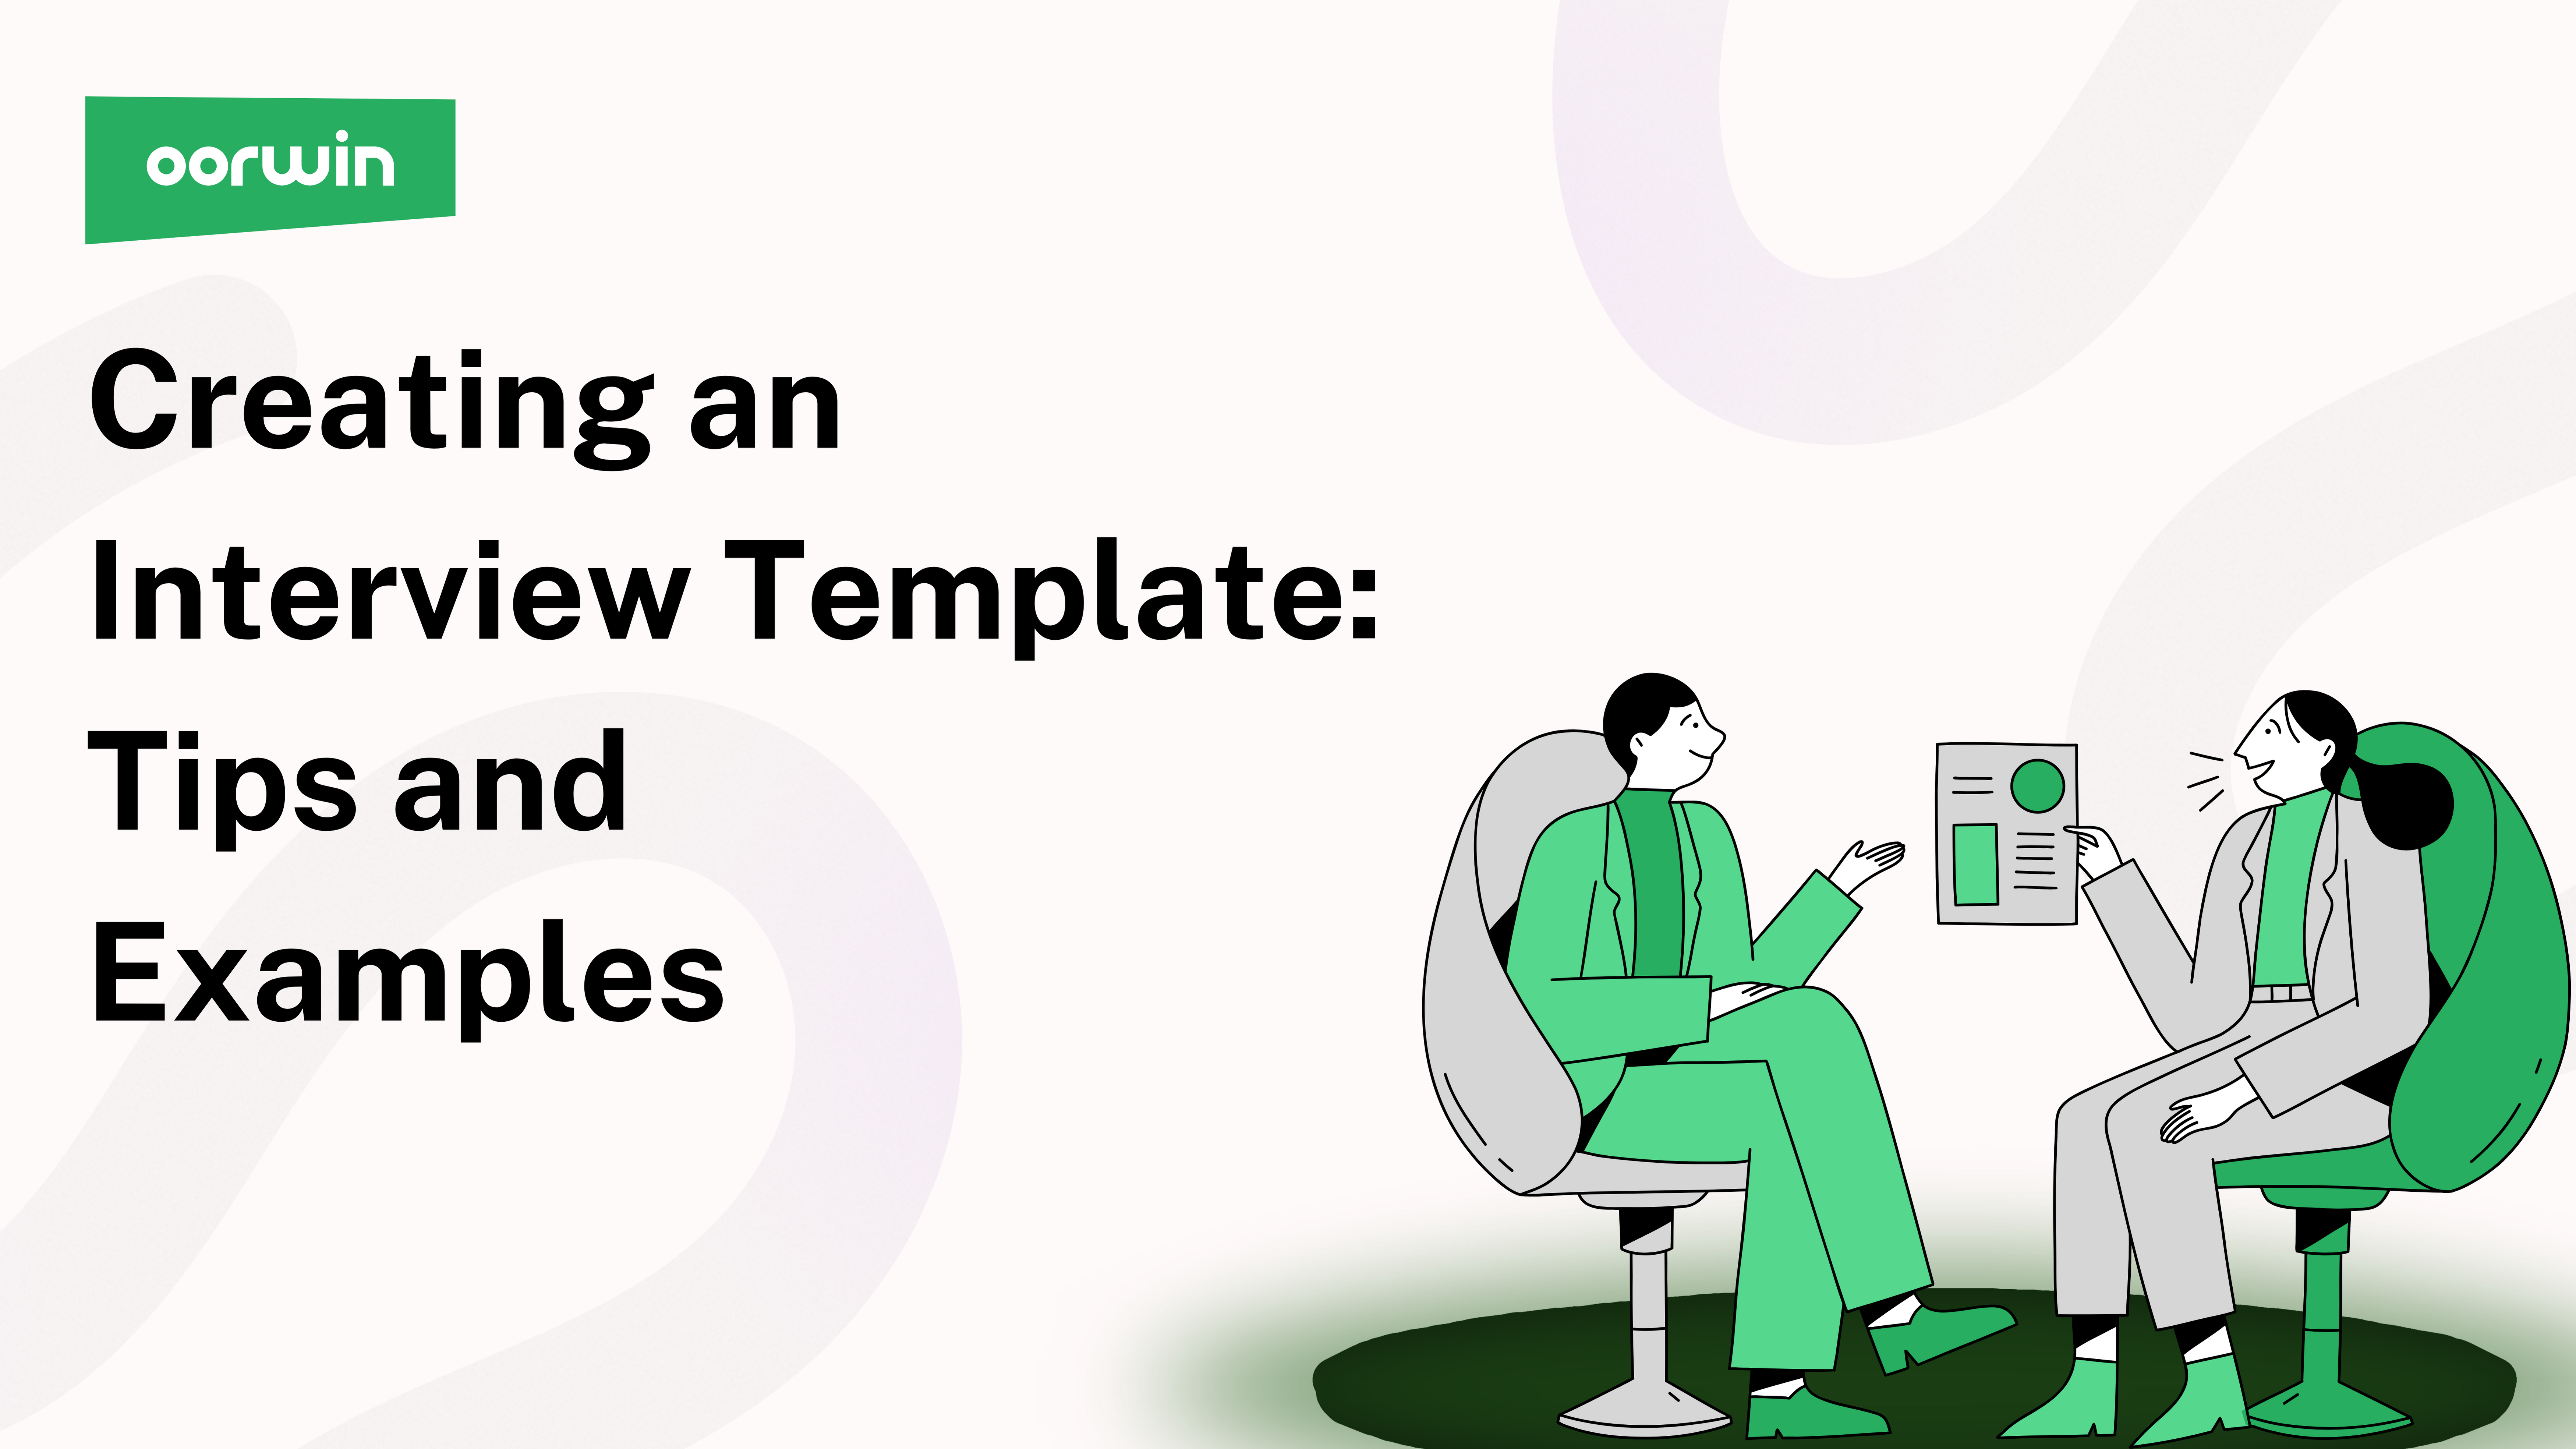 Creating an Interview Template: Tips & Examples